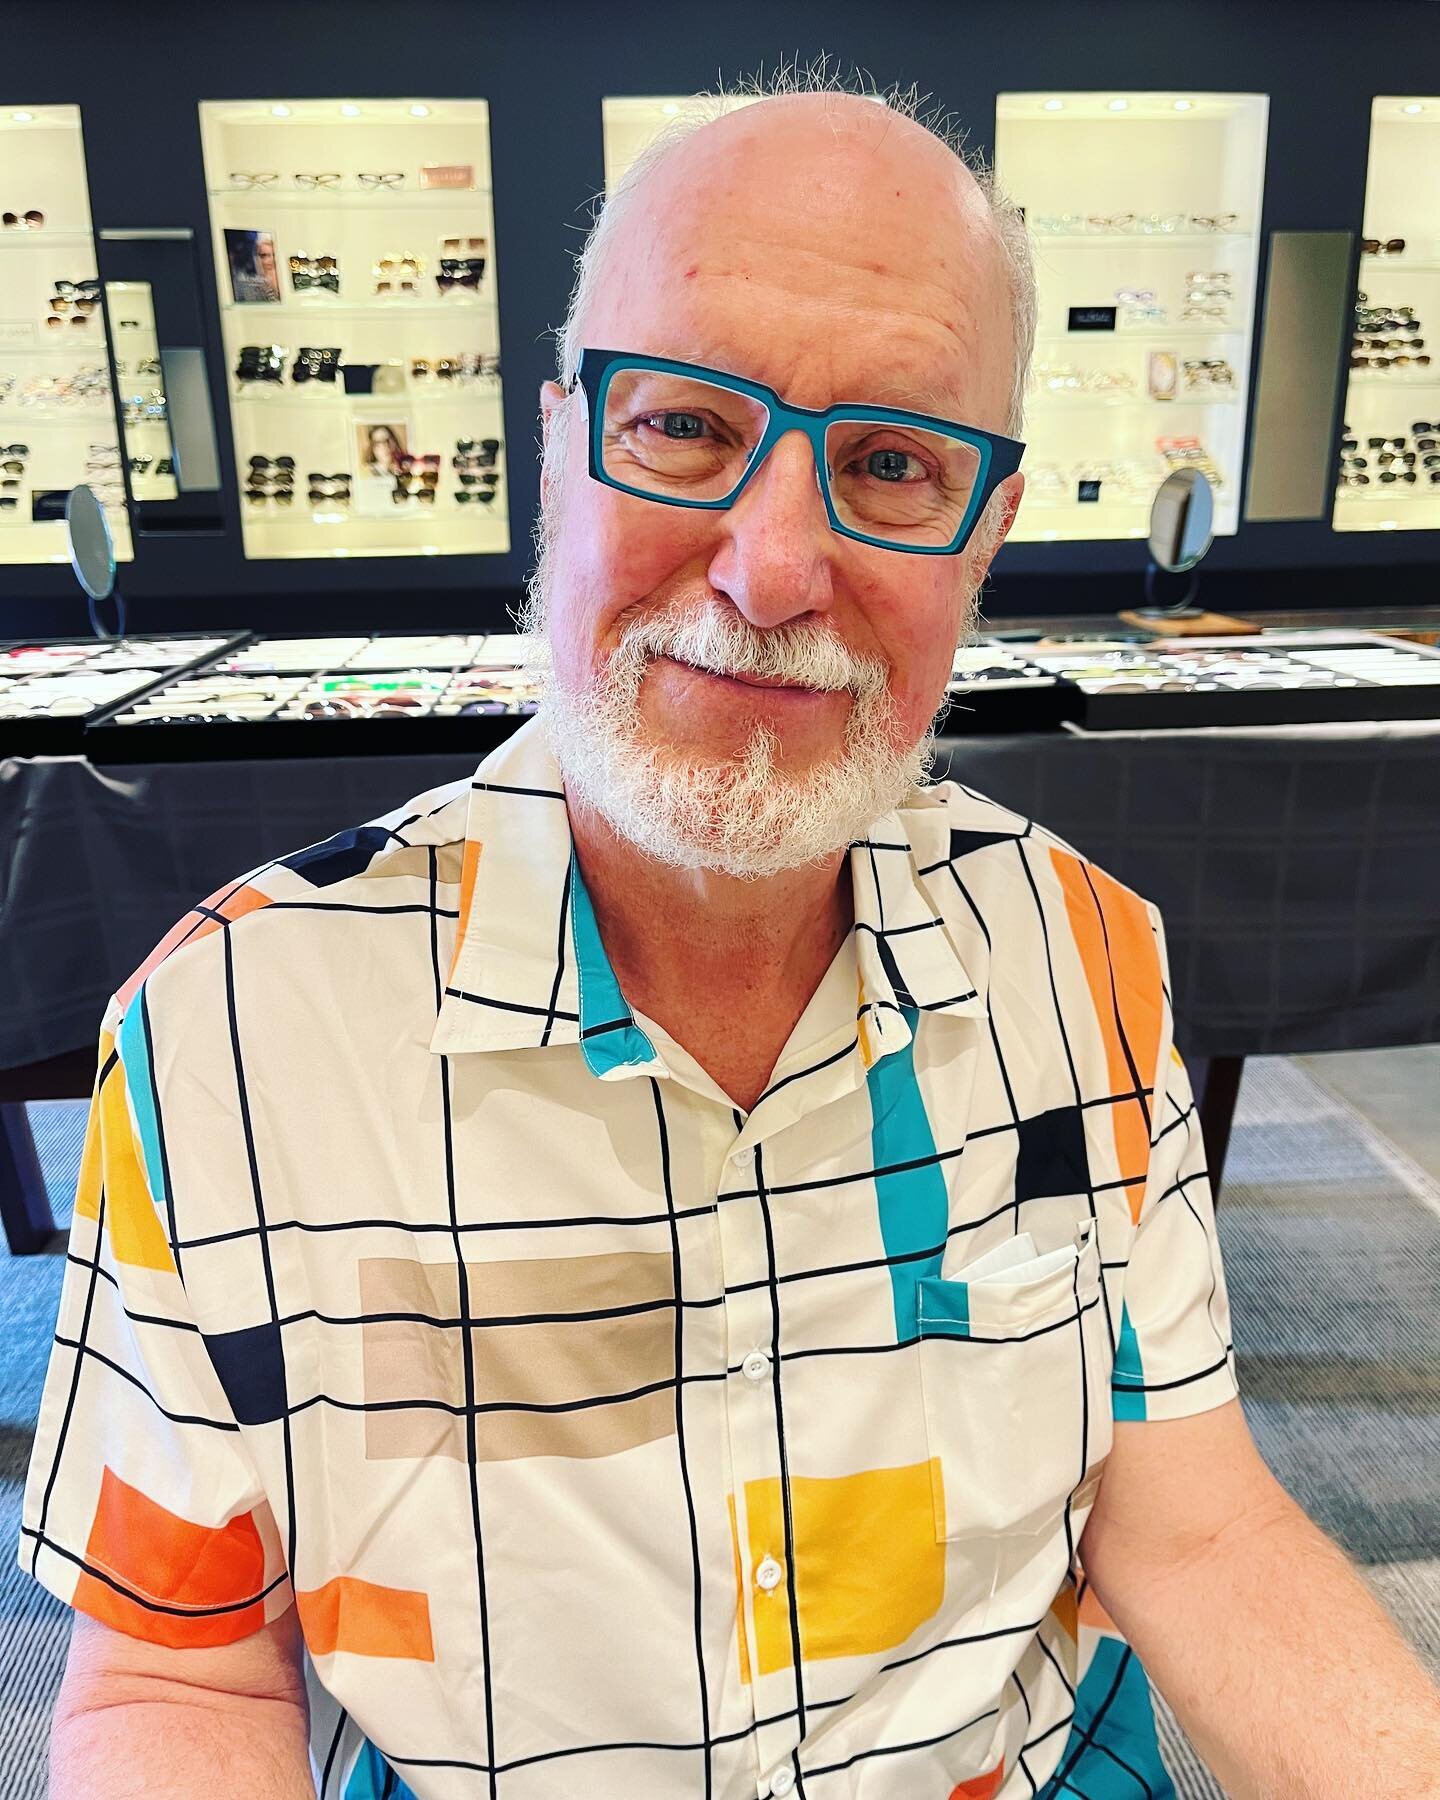 Occhiali customer Fred Lehto, a former cruise ship jazz crooner with a passion for coordinating colorful ensembles. We found the perfect Theo frame for his Art Deco outfit!